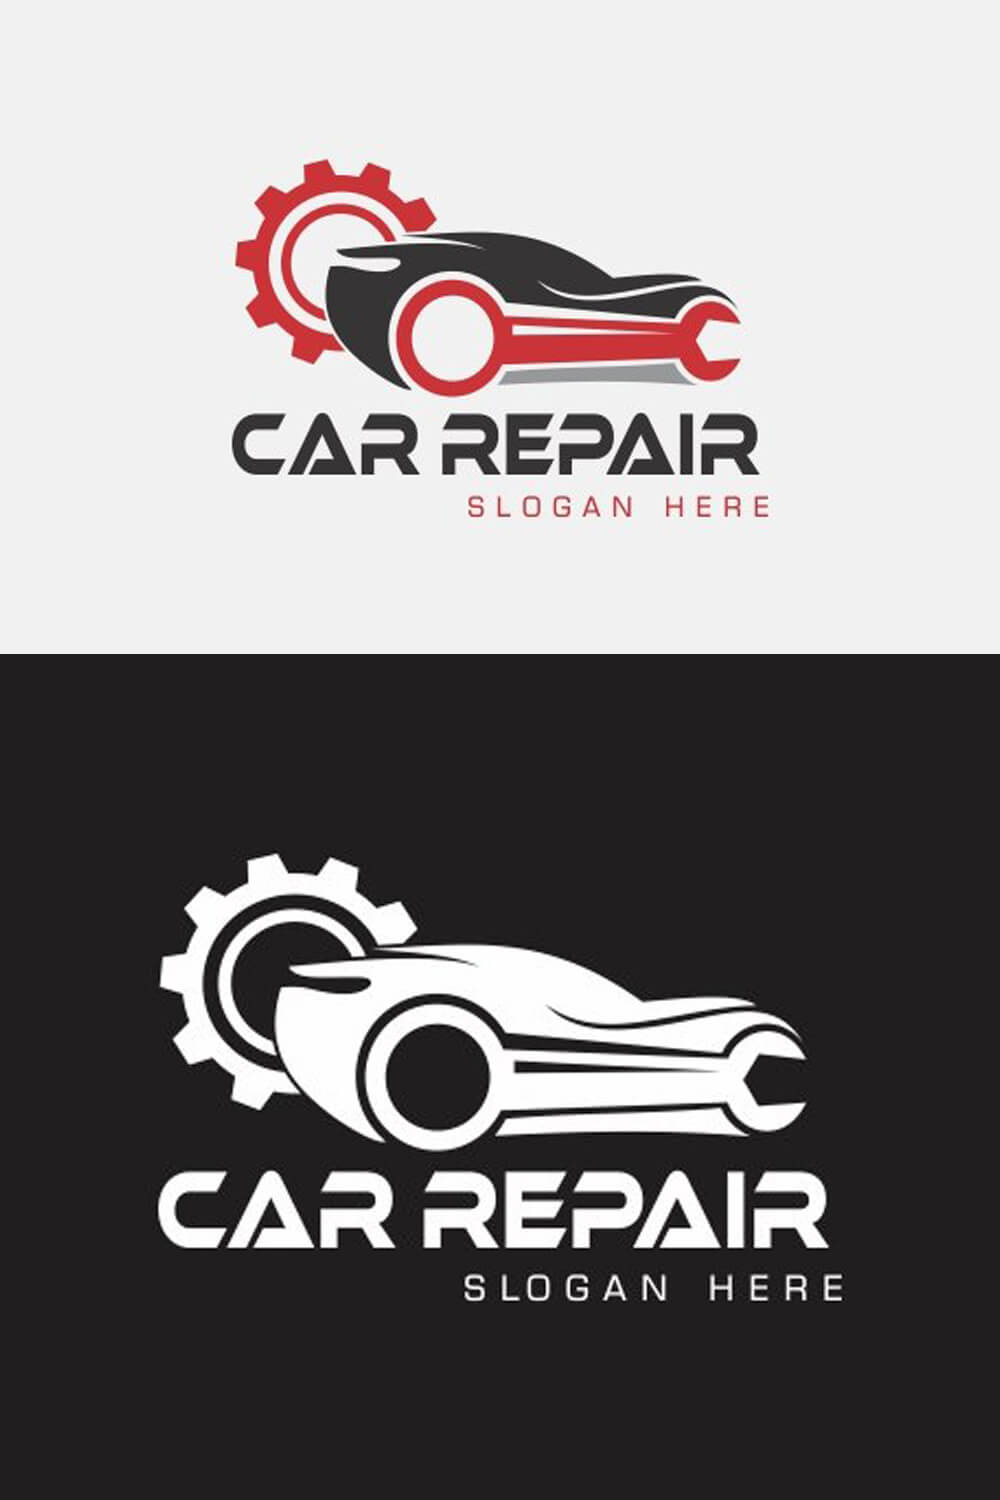 Car service station logo on a white background in black and red colors, and below the black and white logo.